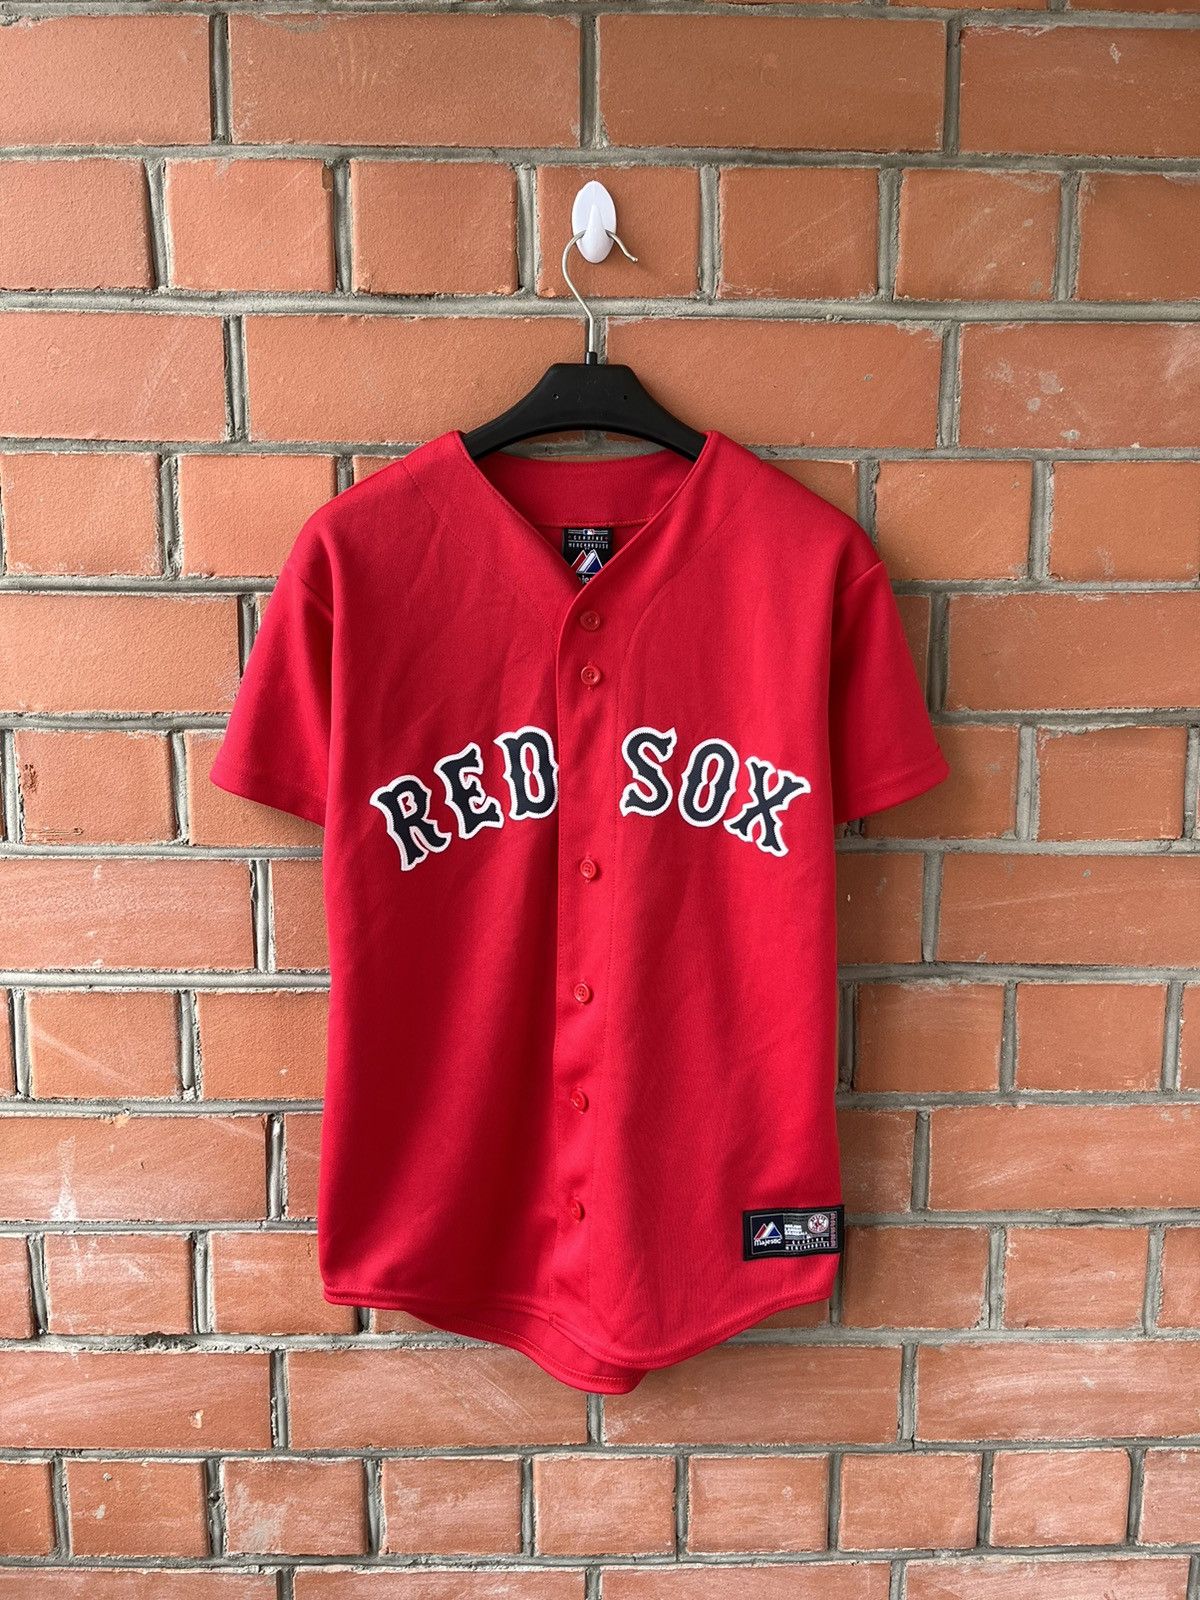 Boston Red Sox vintage Majestic made in Macau jersey red authentic Large L